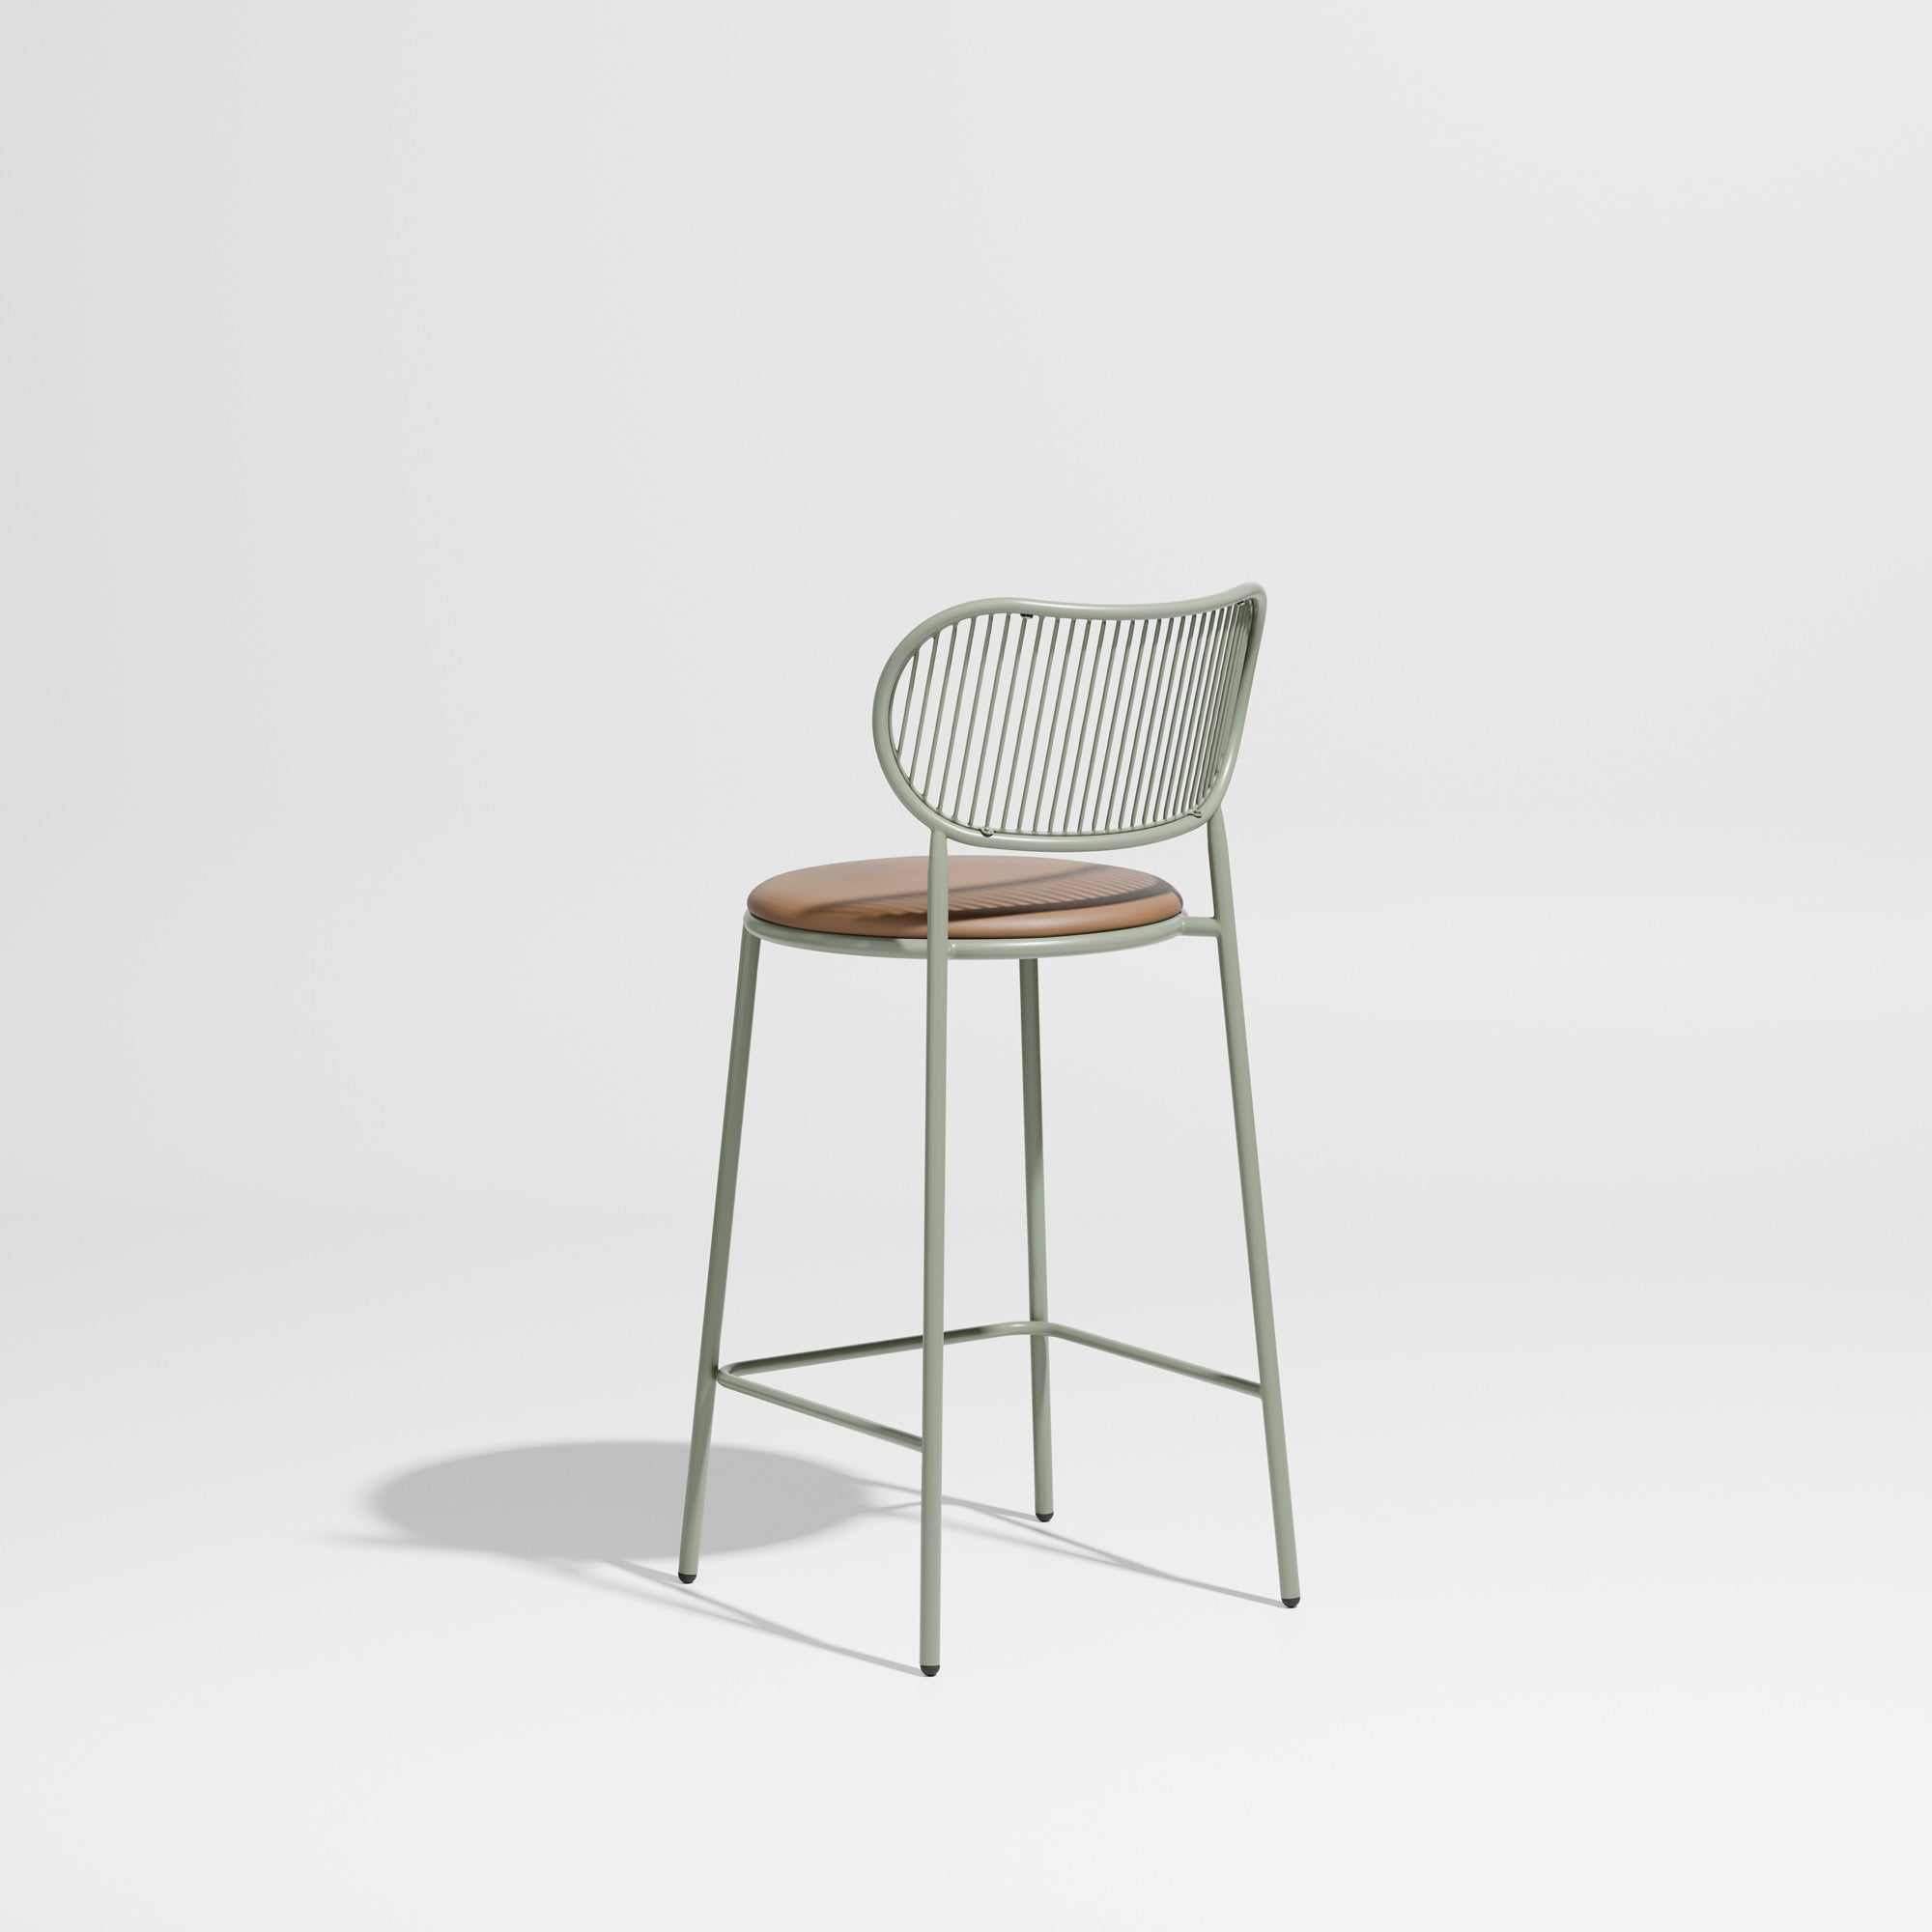 Piper Bar Counter Chair Upholstered | Fabric or Leather Seat | Designed by GibsonKarlo | DesignByThem